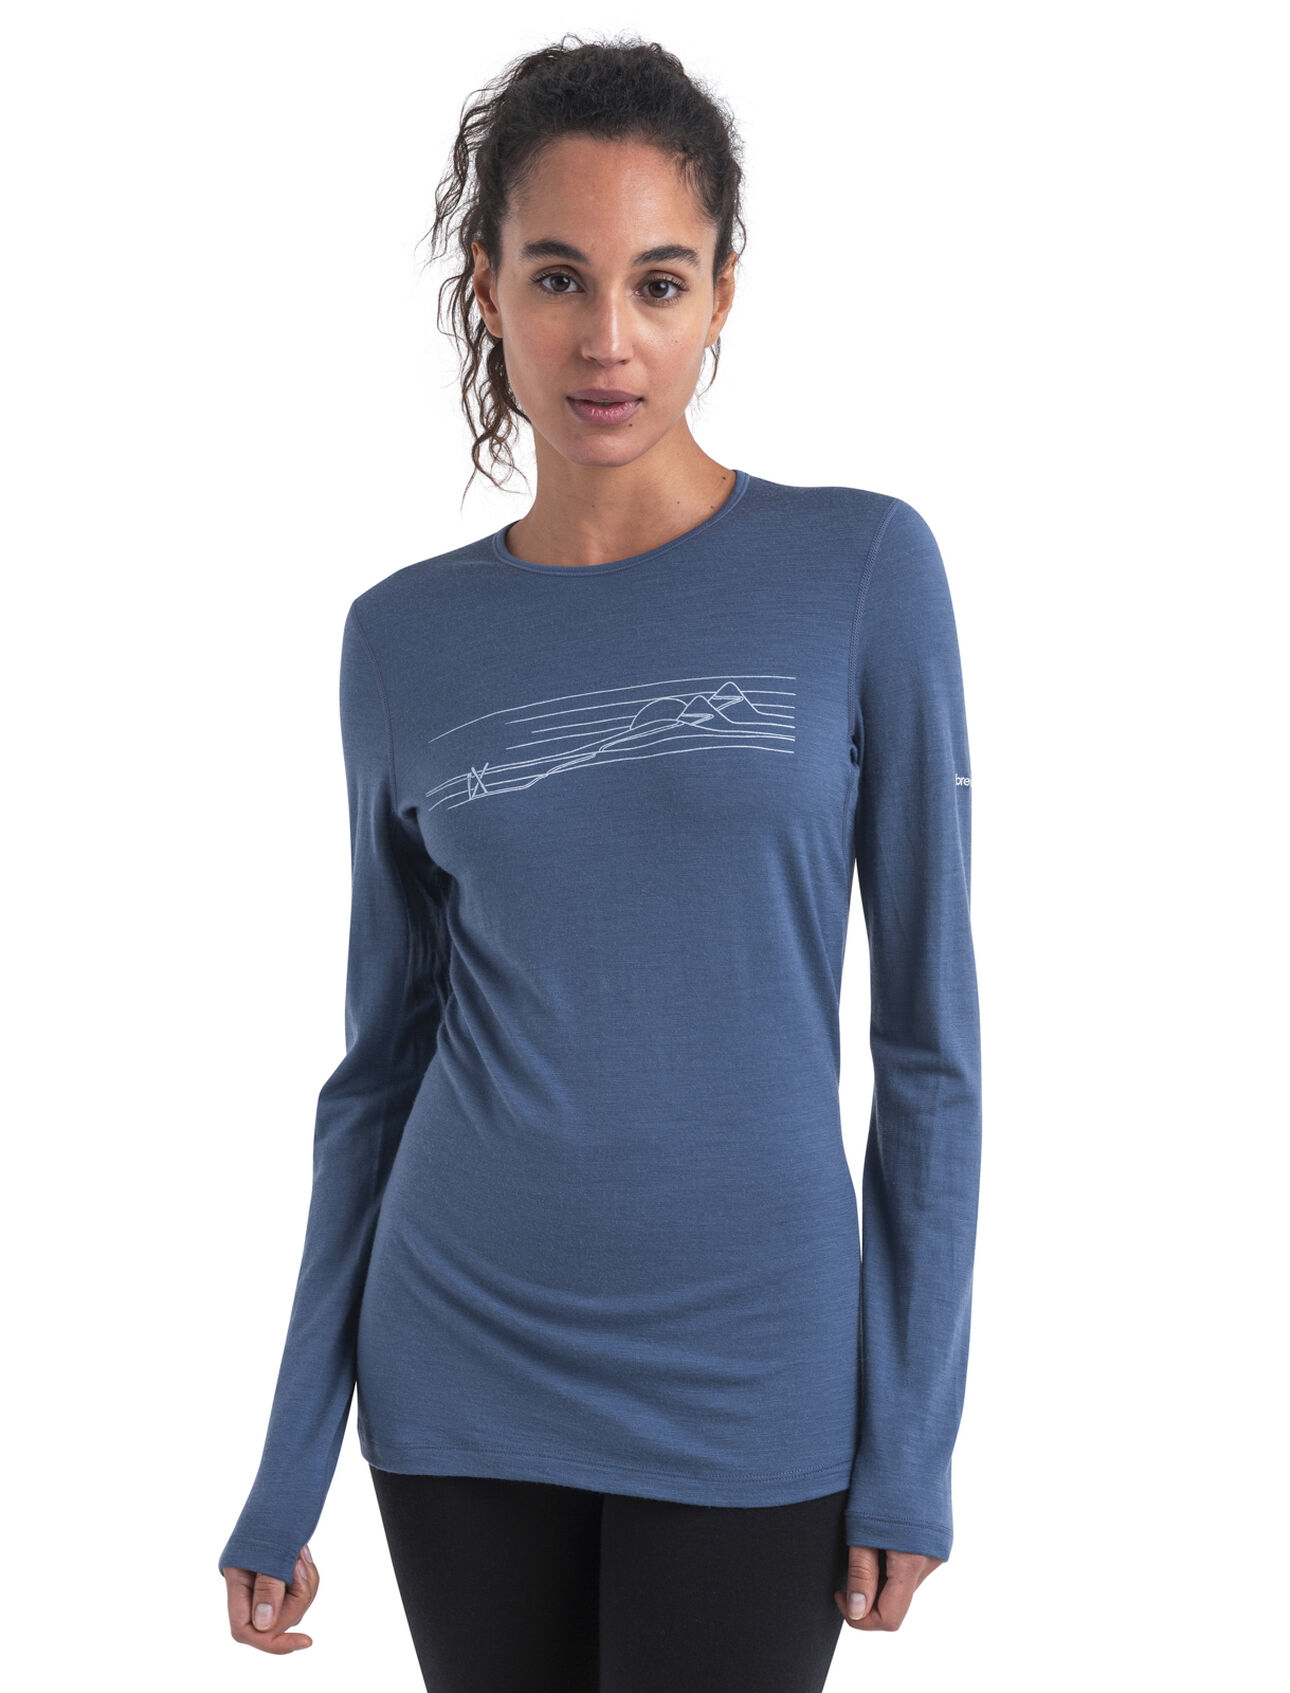 Womens Merino 200 Oasis Long Sleeve Crew Thermal Top Ski Stripes The benchmark against which all others are judged, the 200 Oasis Long Sleeve Crewe Ski Stripes features our most versatile merino jersey fabric for year-round layering performance across any activity. The original graphic artwork by Damon Watters features a classic alpine powder run.